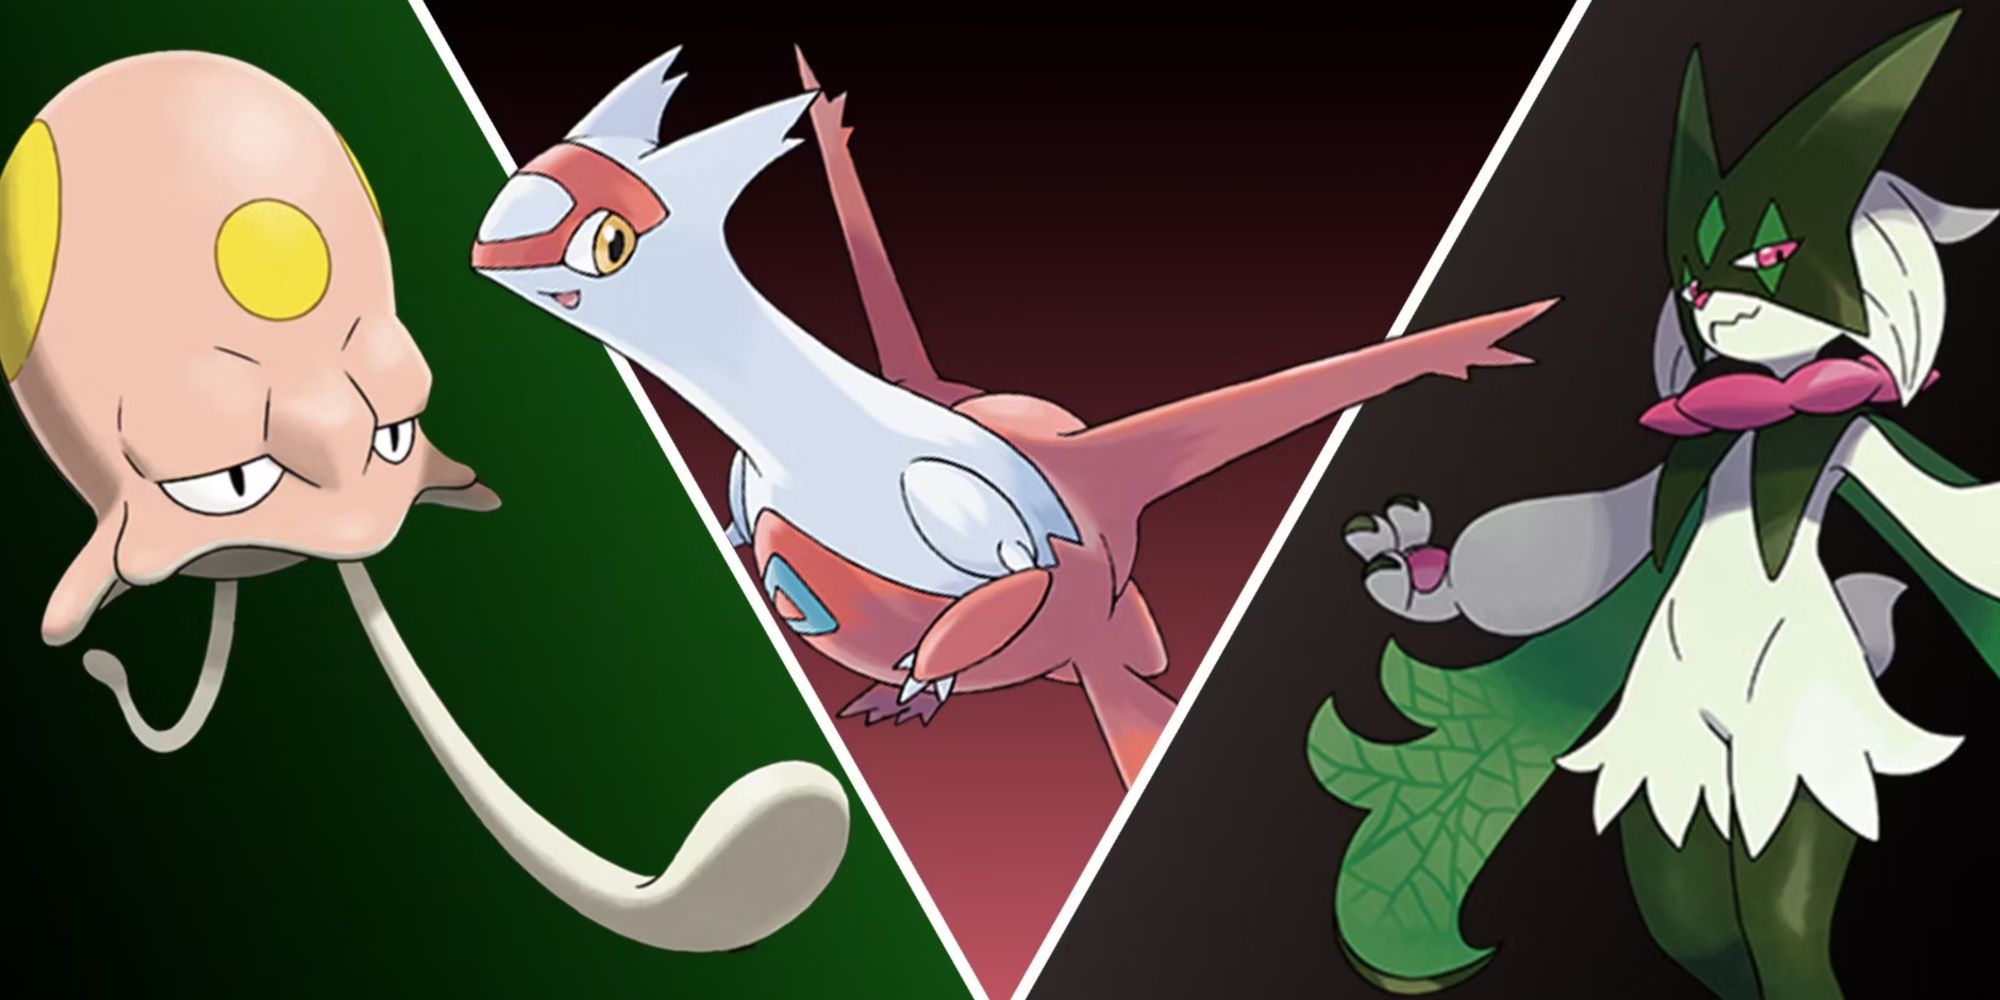 Toedscool and Meowscarada standing on either side of Latias flying between them.